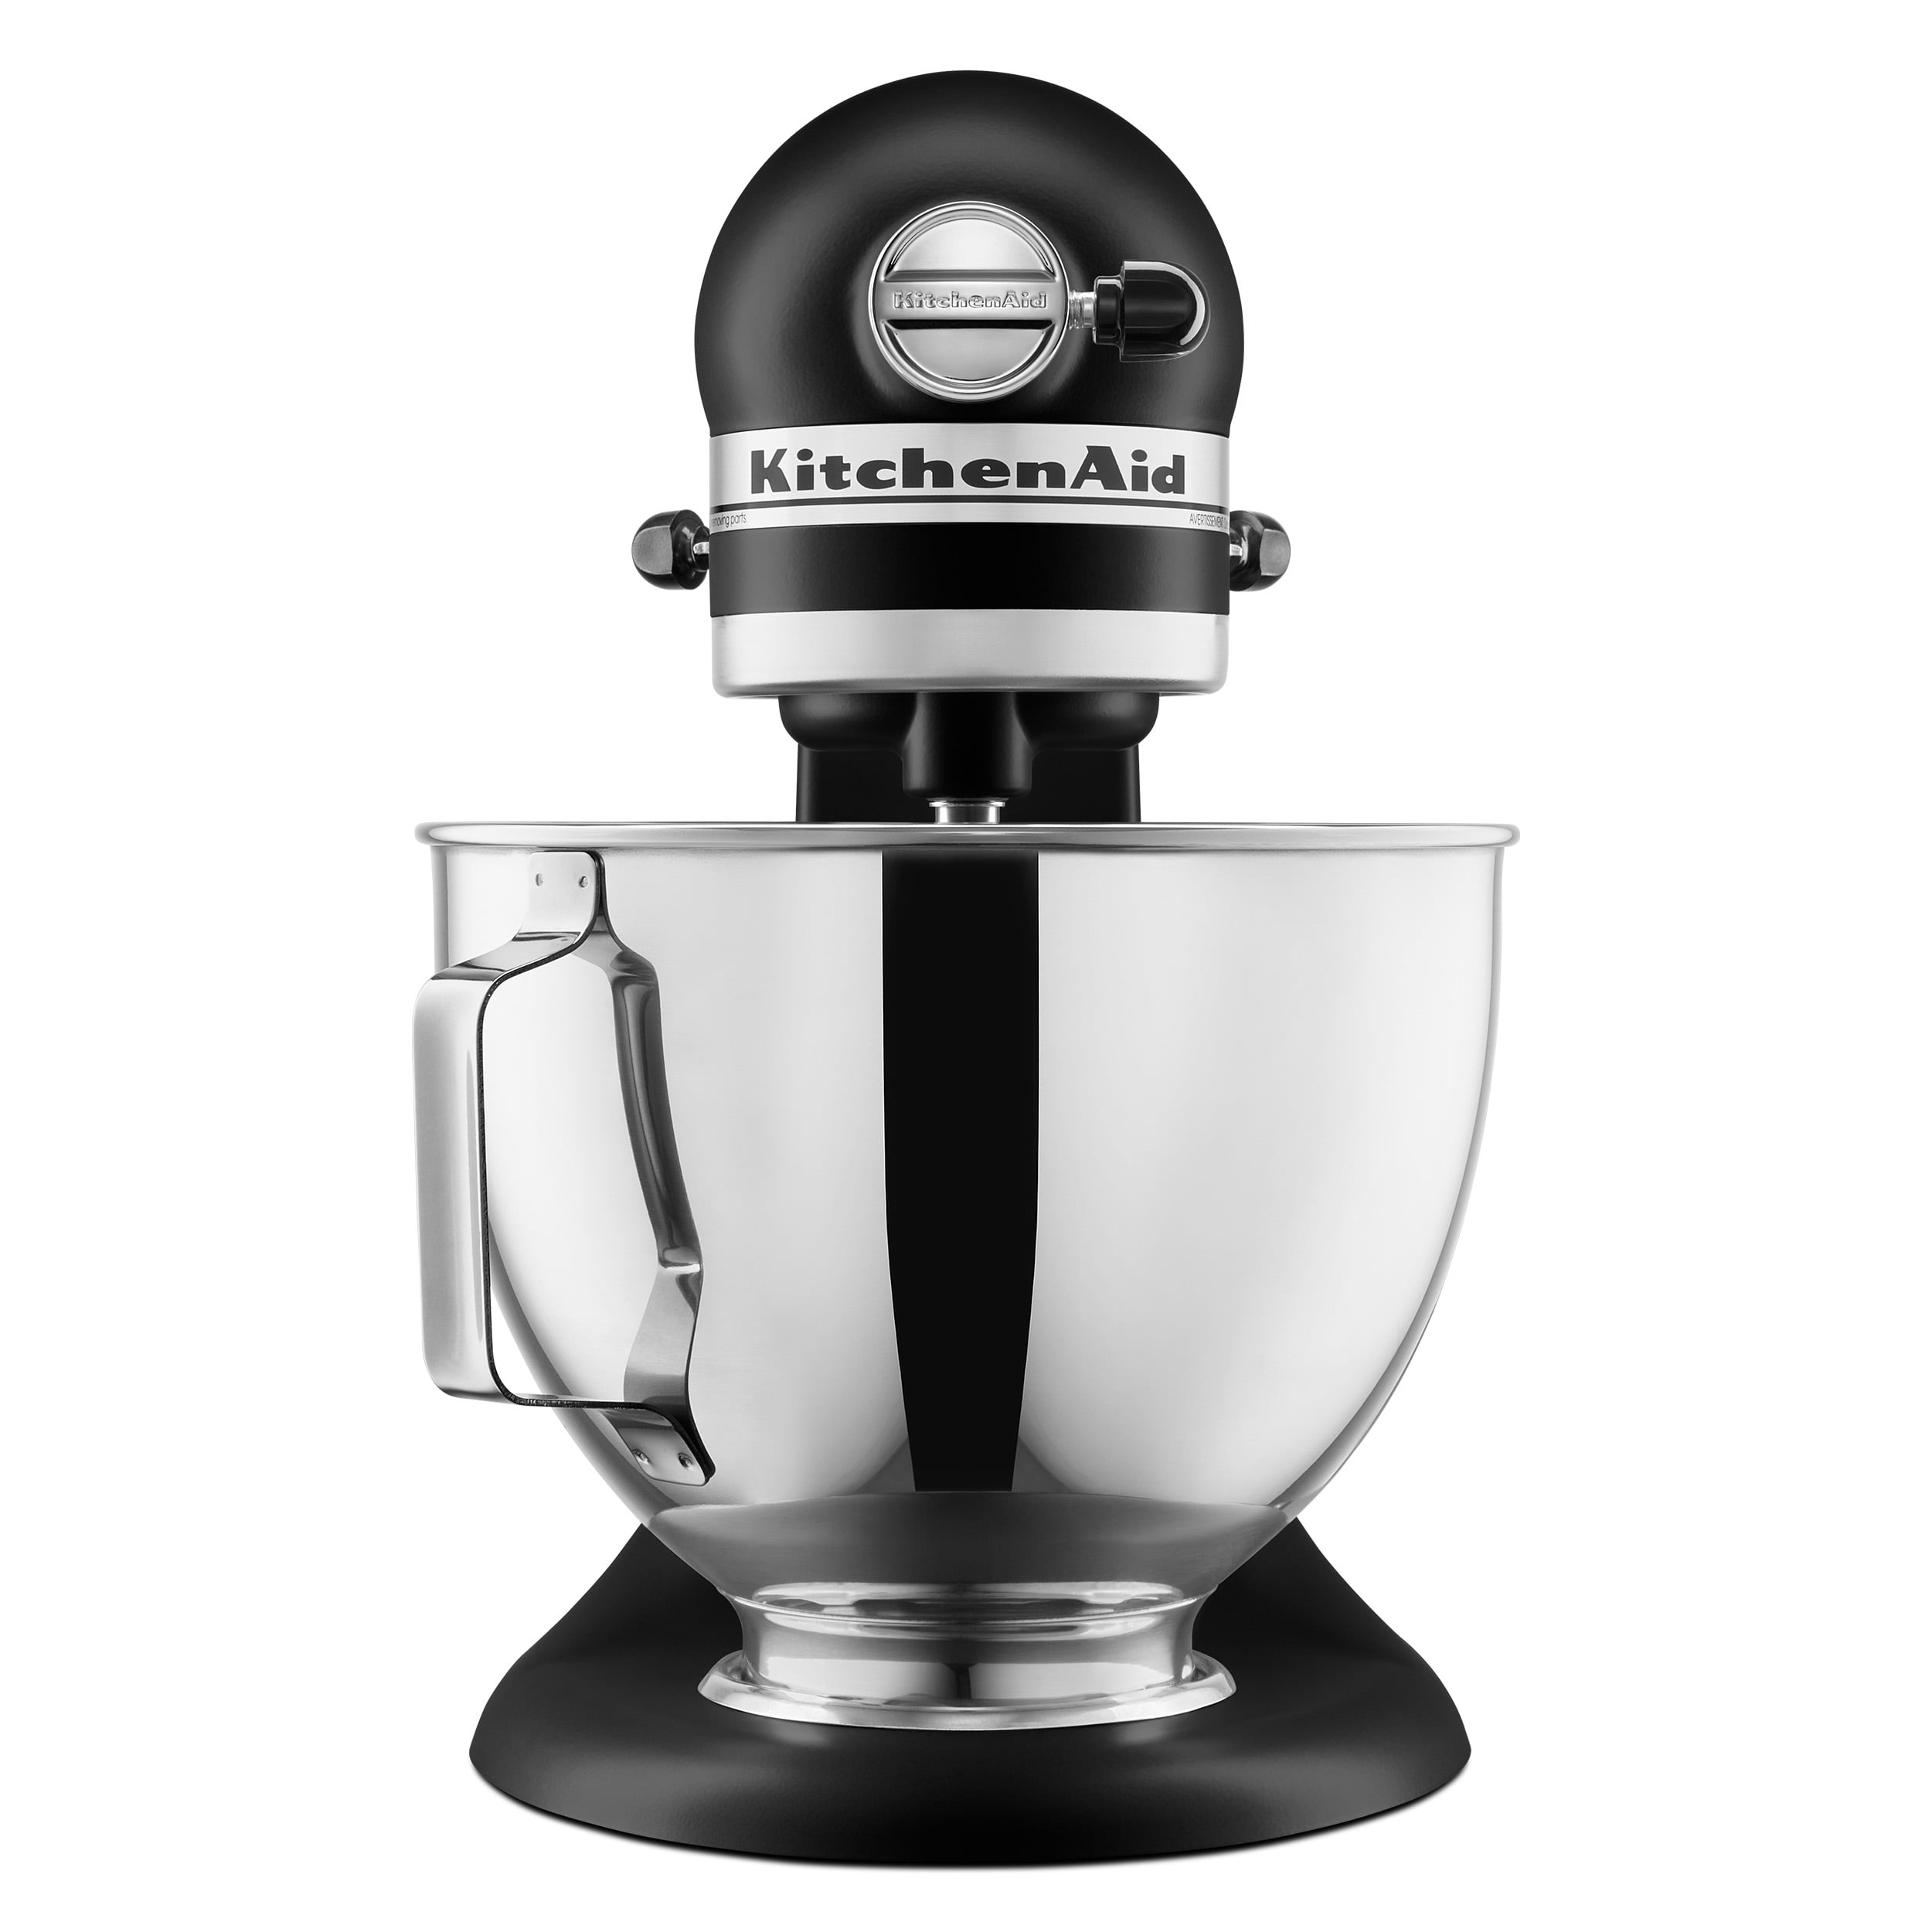 KitchenAid 4.5 Quart Tilt Head Stand Mixer in Onyx Black and Stainless  Steel